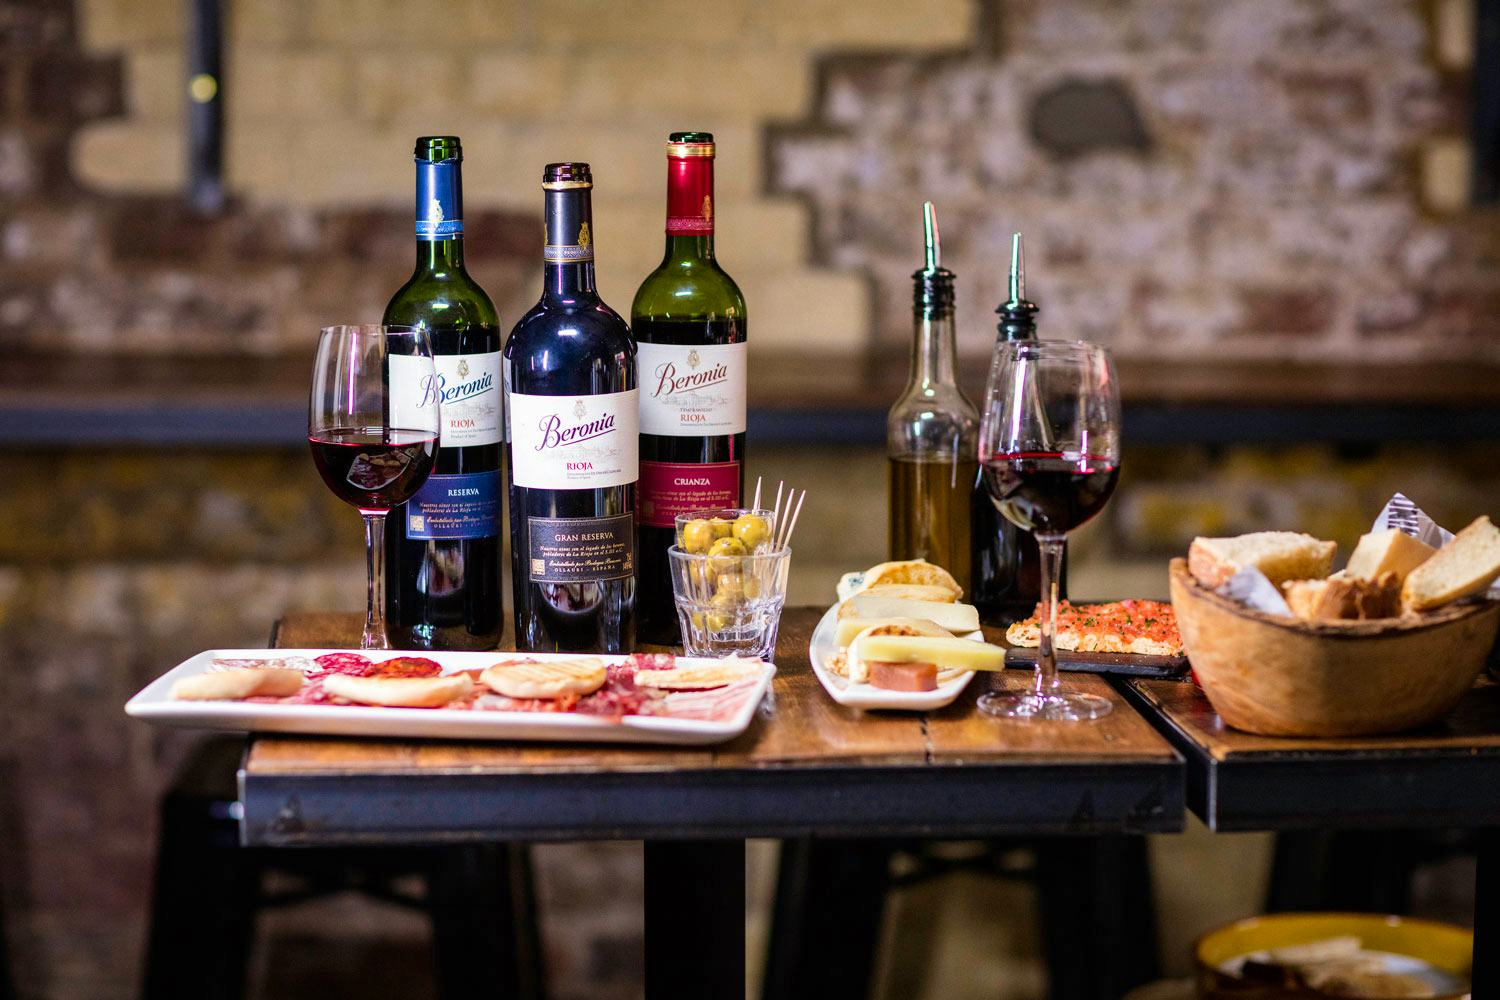 Beronia wines red wines on restaurant table with food